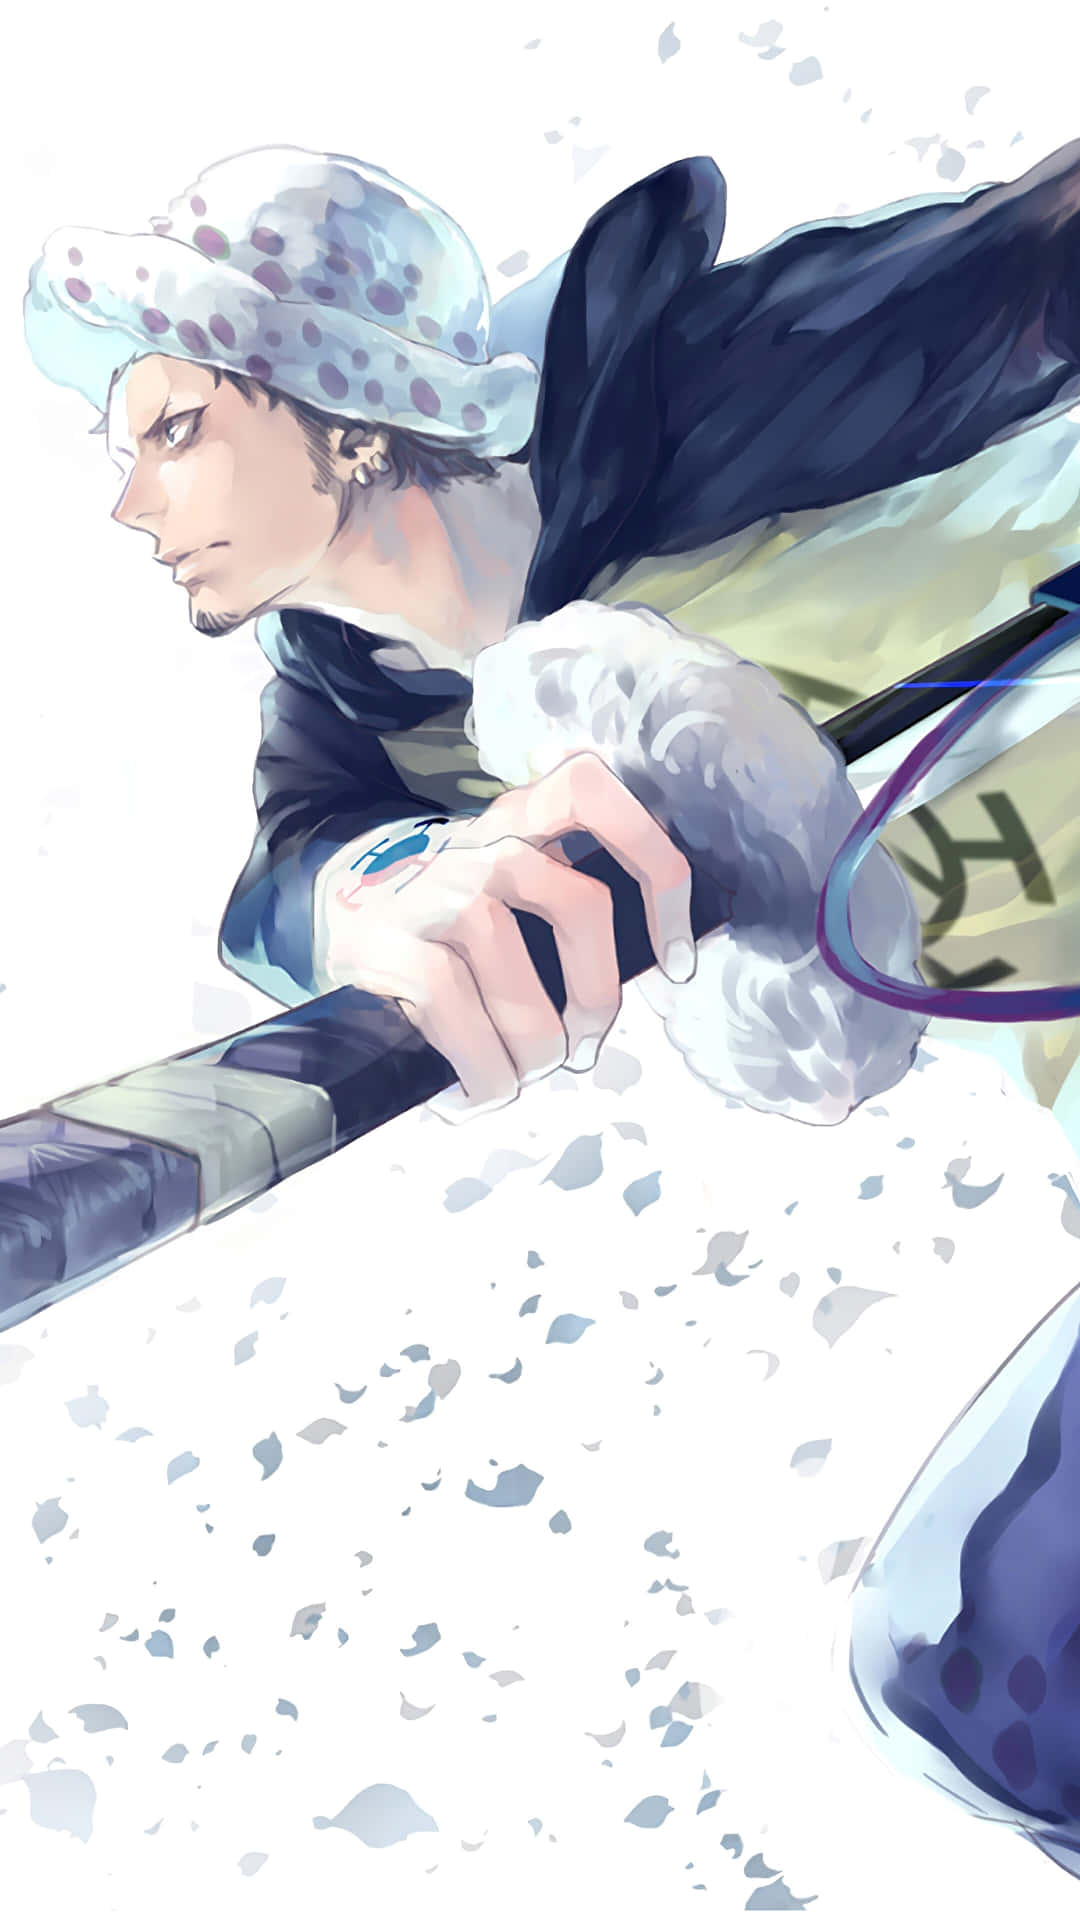 "One Piece's Trafalgar Law, defying the odds and rising to the top." Wallpaper